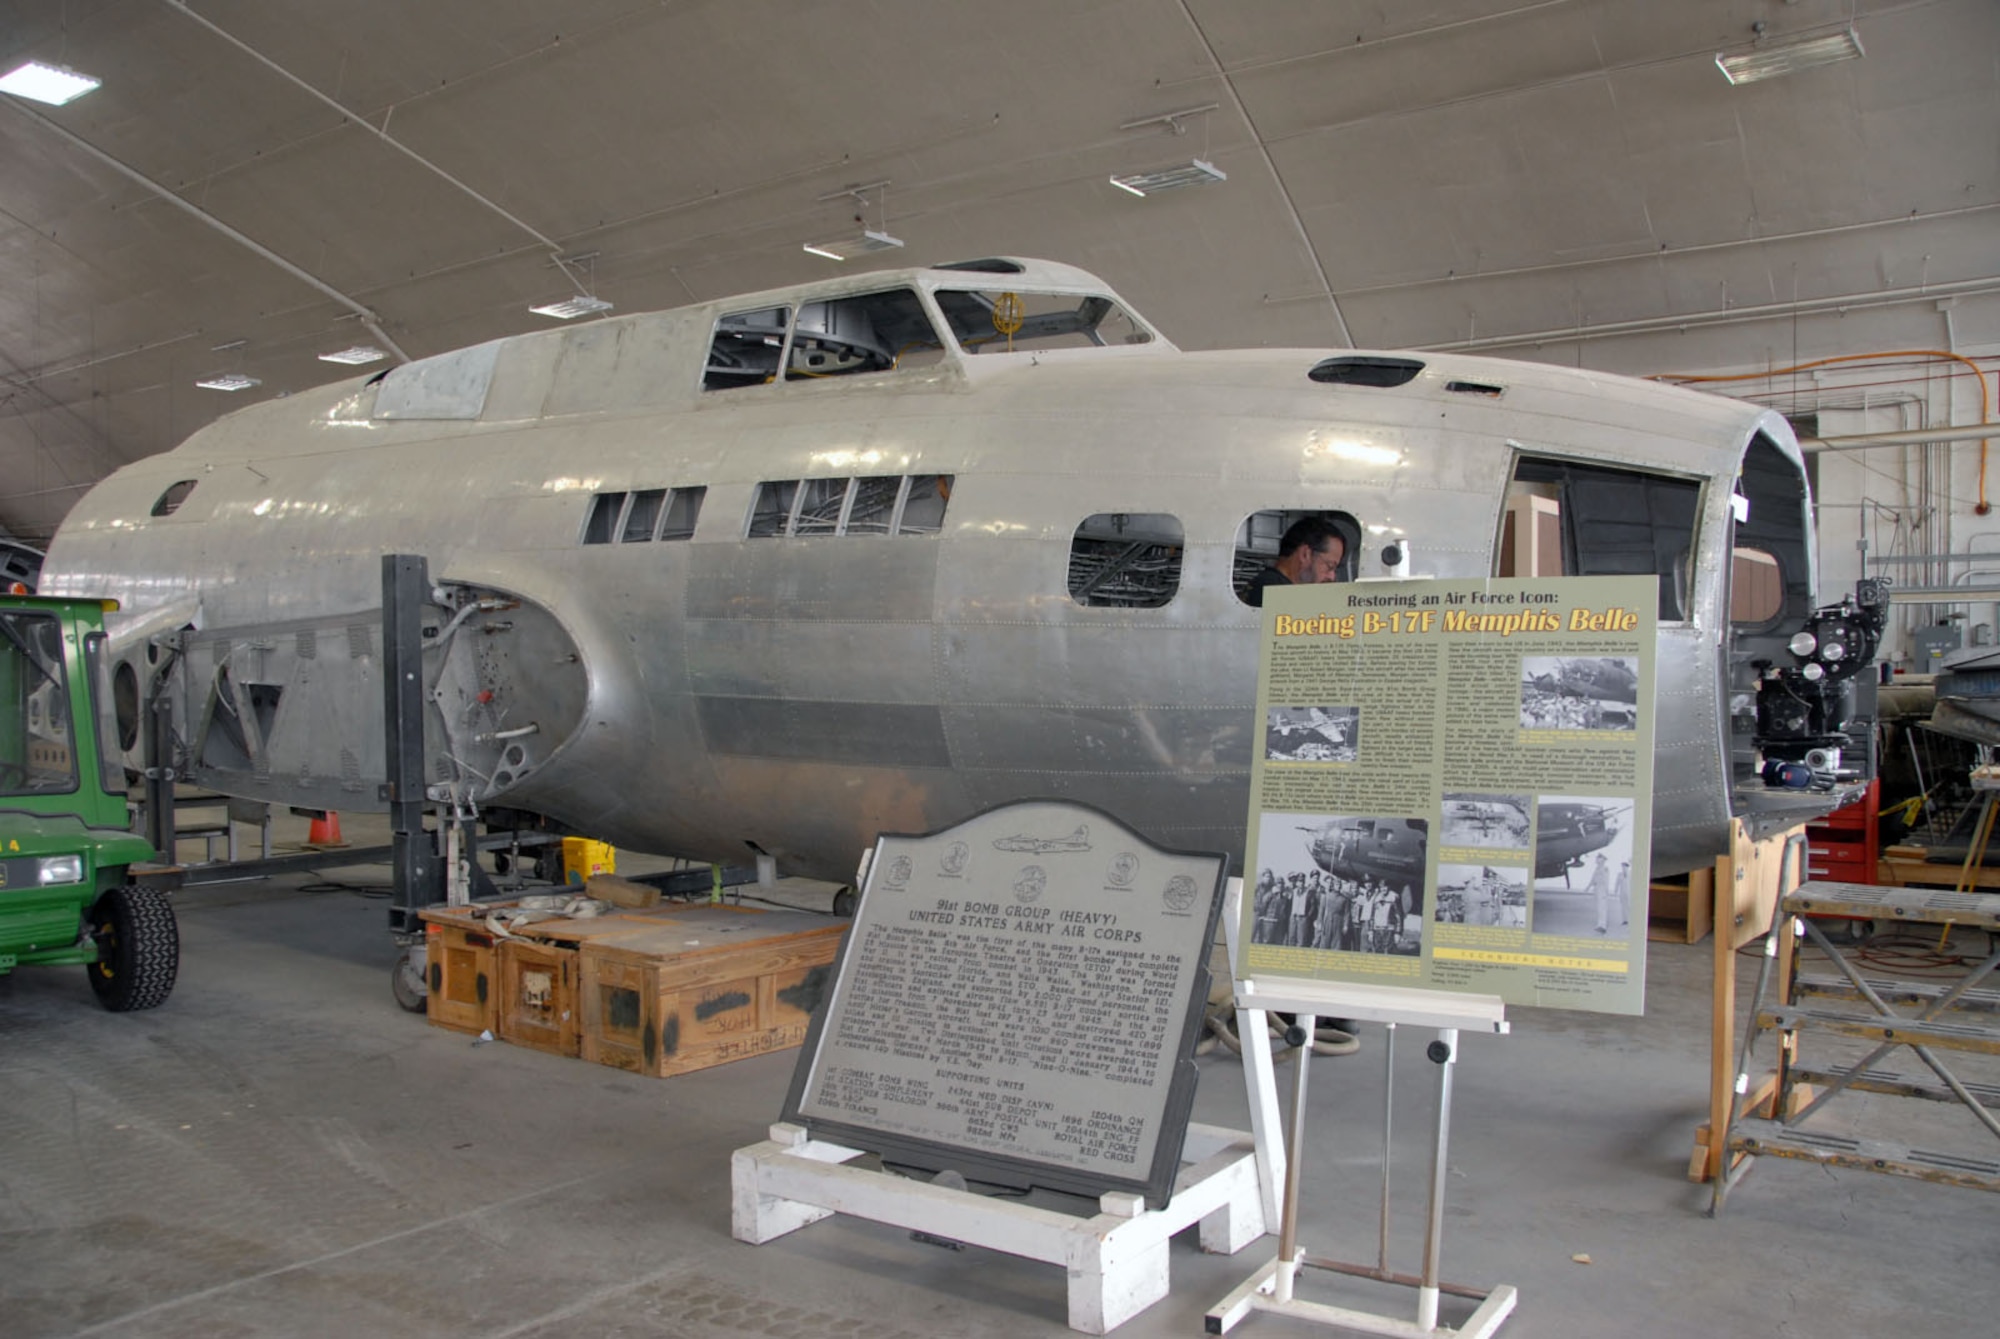 DAYTON, Ohio (11/2010) -- Boeing B-17F "Memphis Belle" in restoration at the National Museum of the U.S. Air Force. (U.S. Air Force photo)